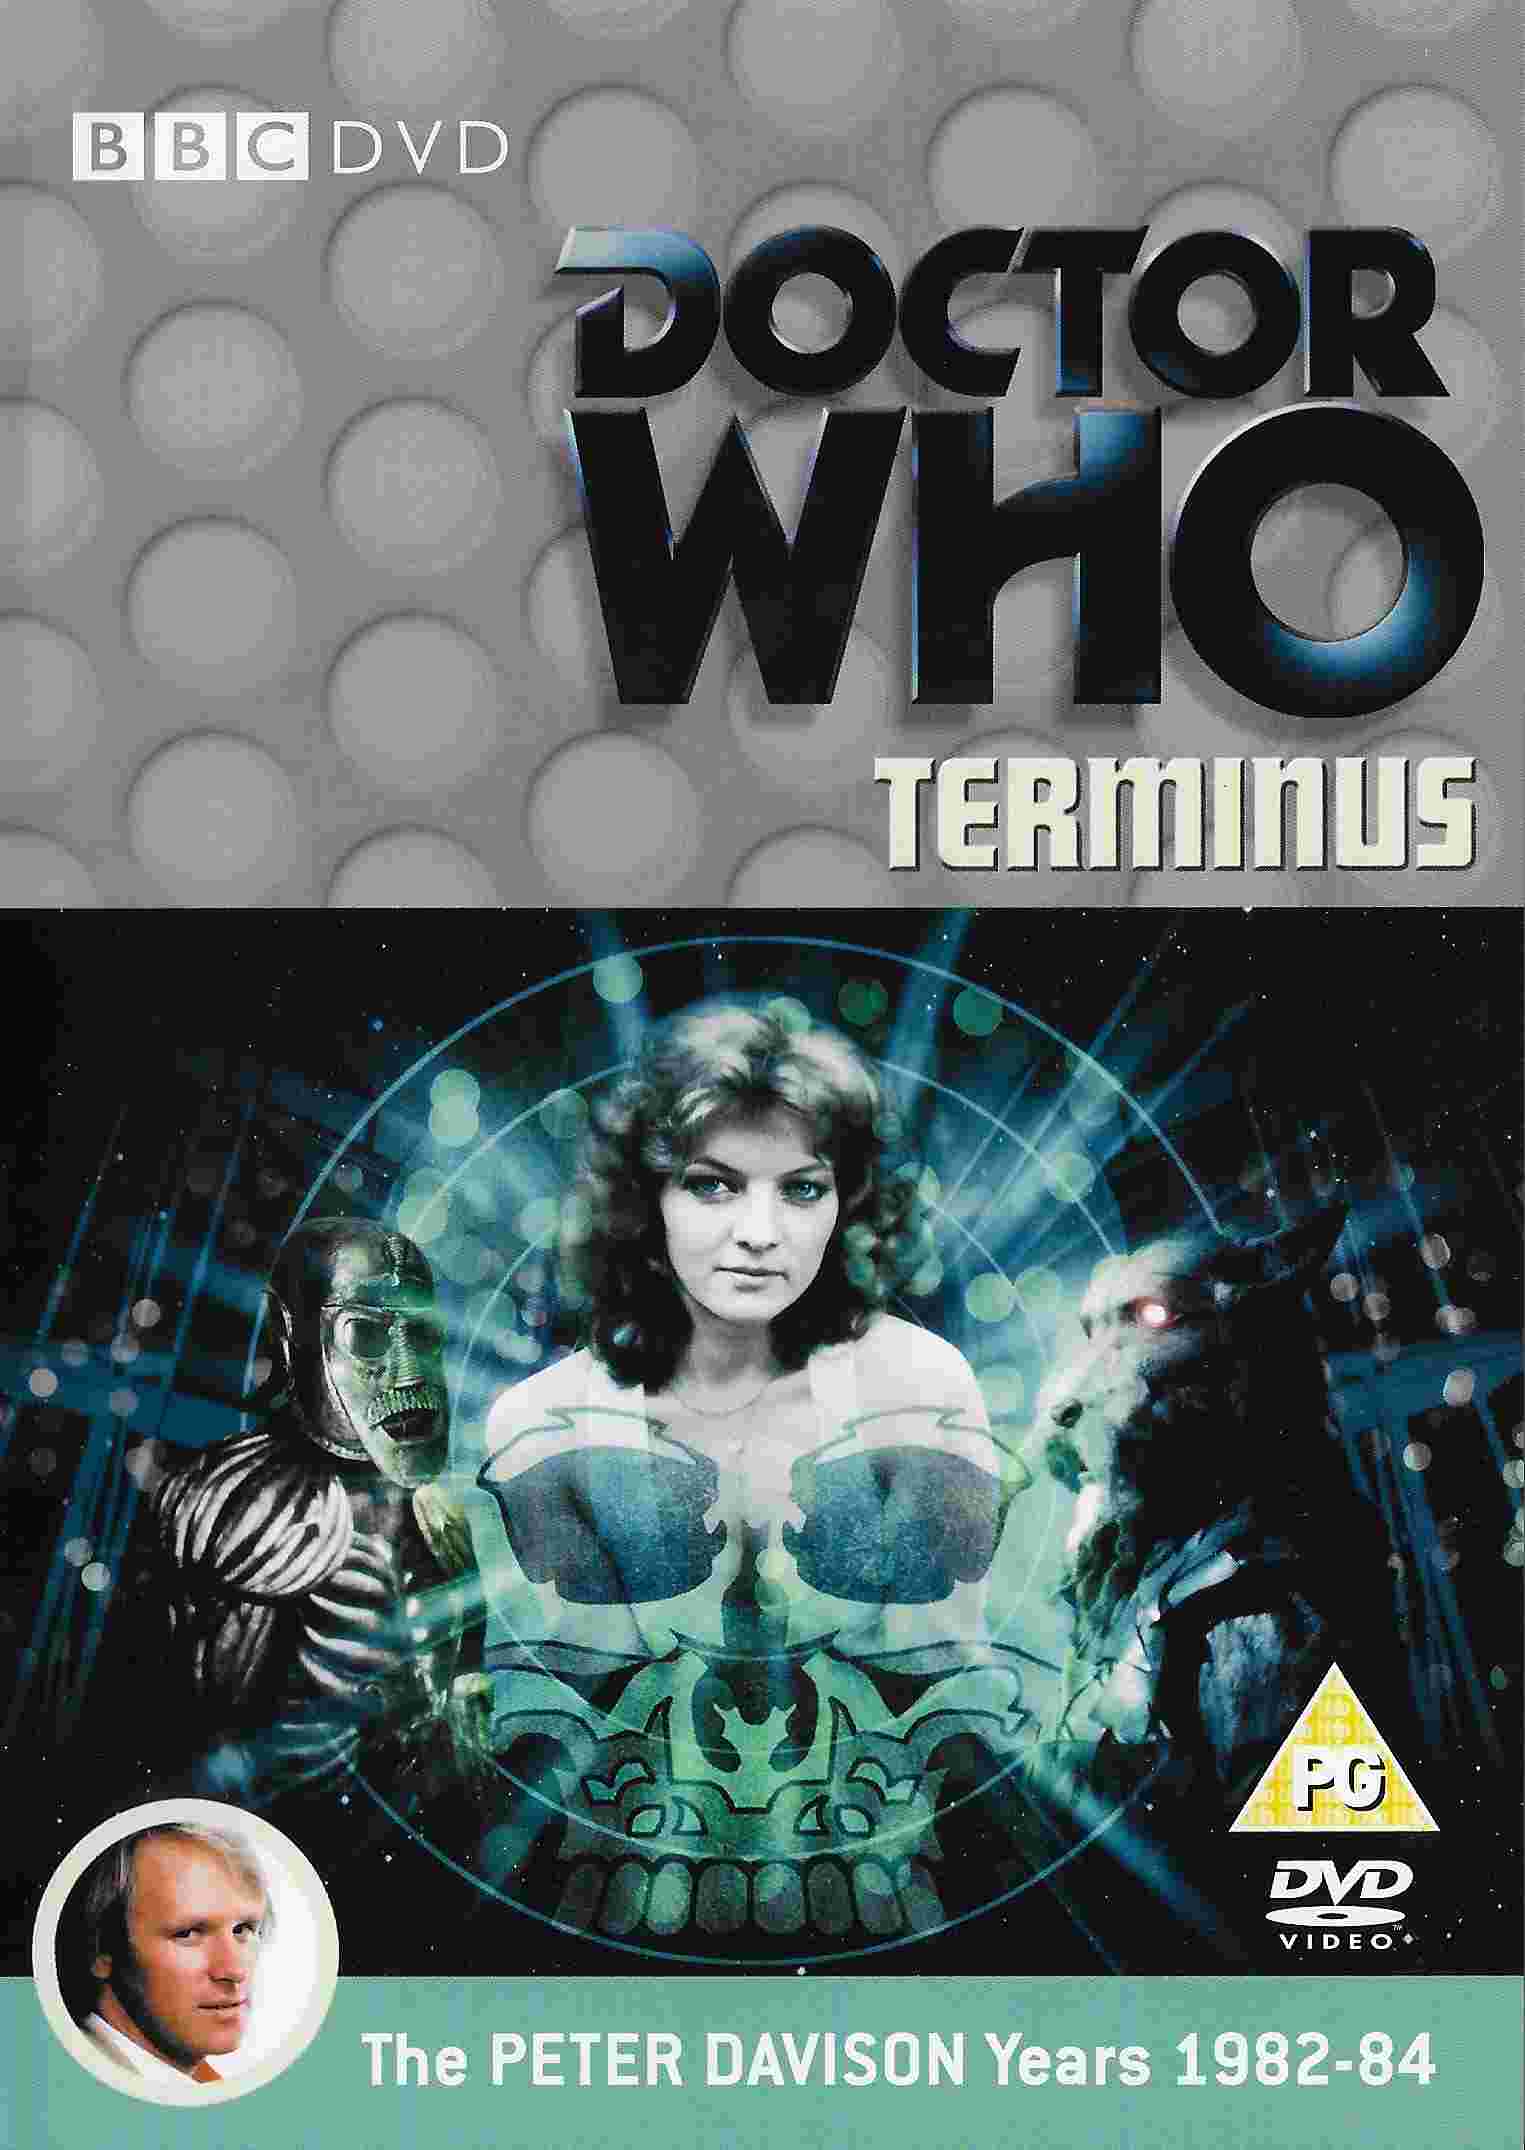 Picture of BBCDVD 2596B Doctor Who - Terminus by artist Steve Gallagher from the BBC records and Tapes library